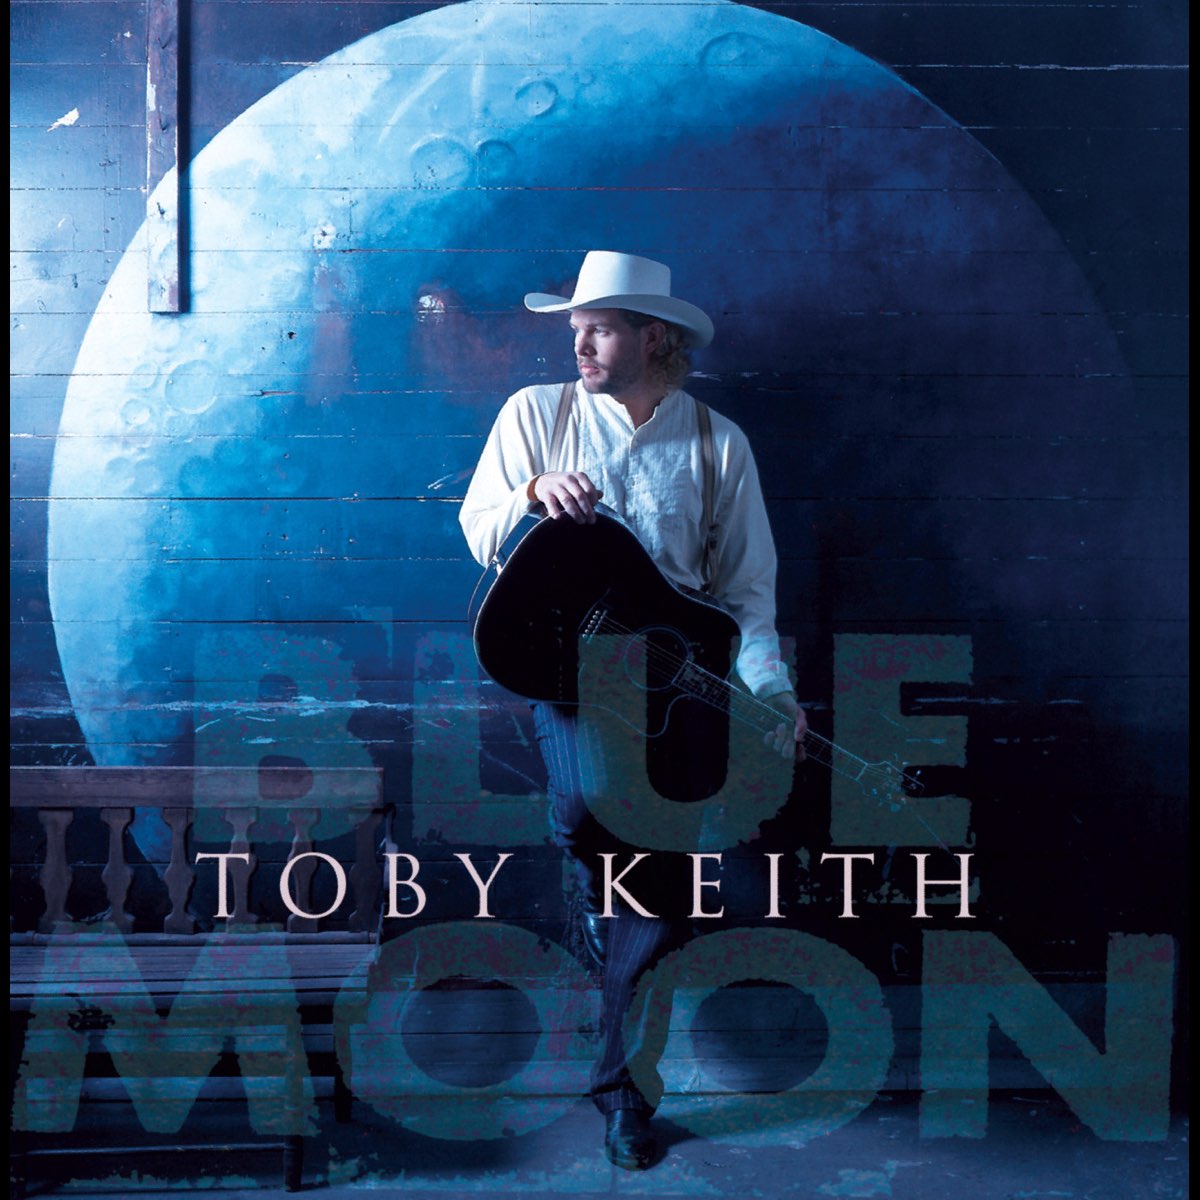 Blue Moon - Album by Toby Keith - Apple Music